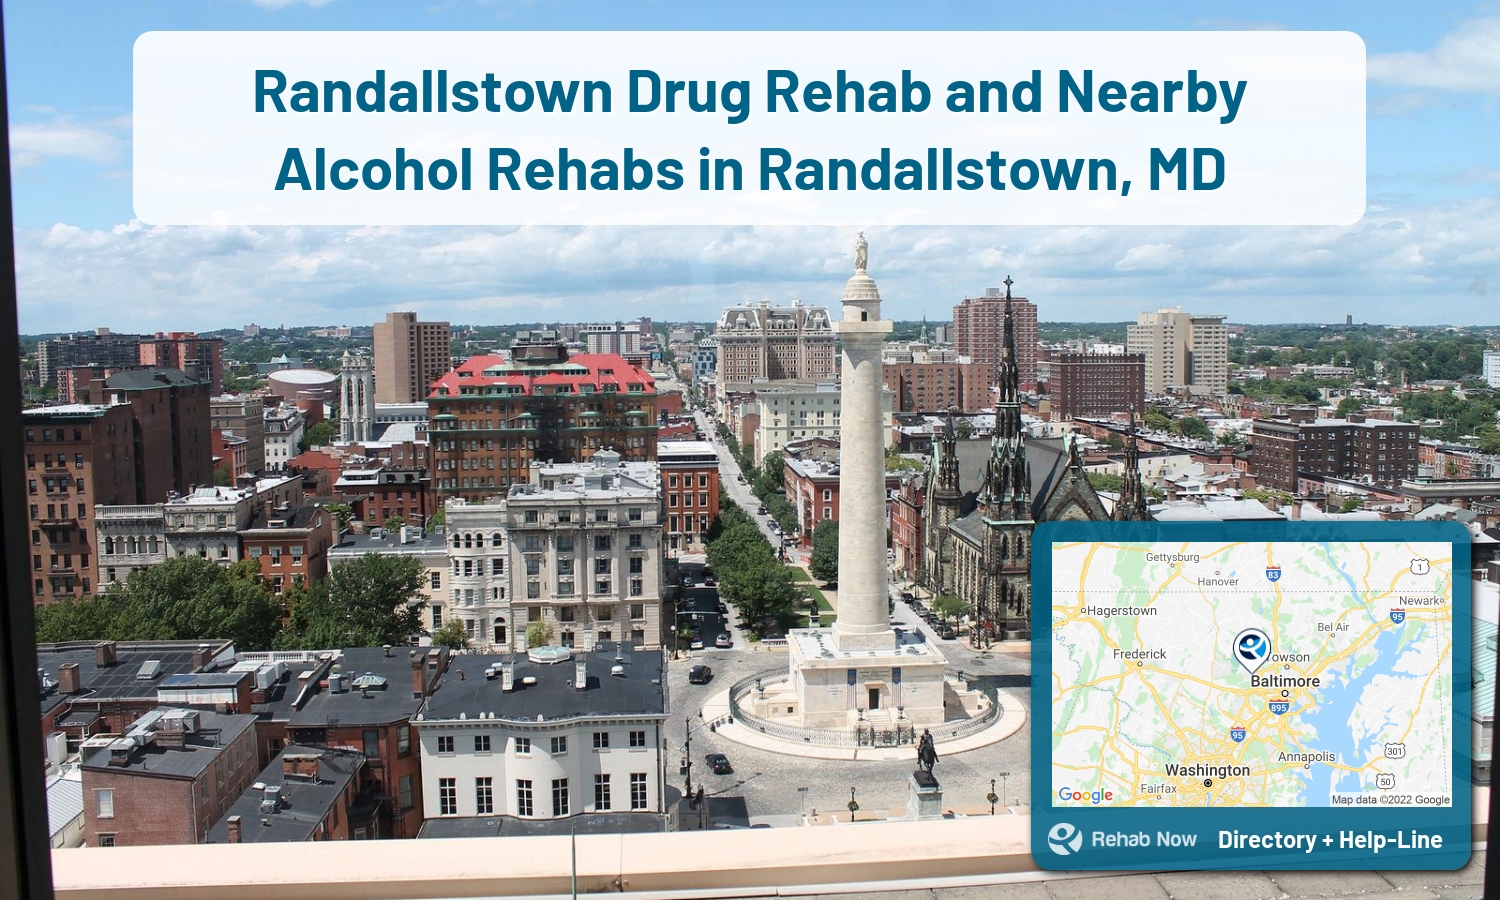 List of alcohol and drug treatment centers near you in Randallstown, Maryland. Research certifications, programs, methods, pricing, and more.